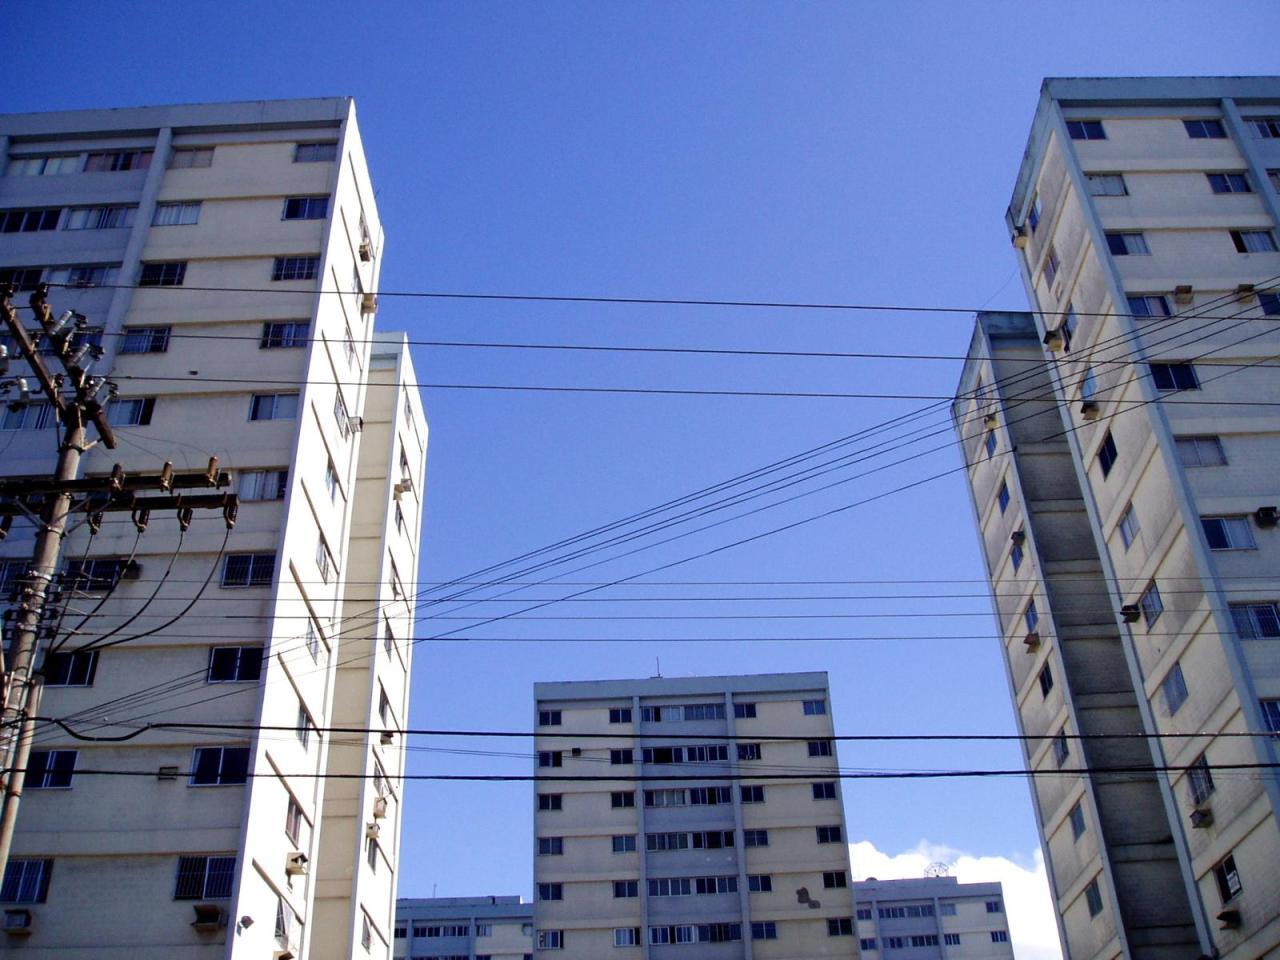 apartment buildings in a large city with electric wires in the foreground